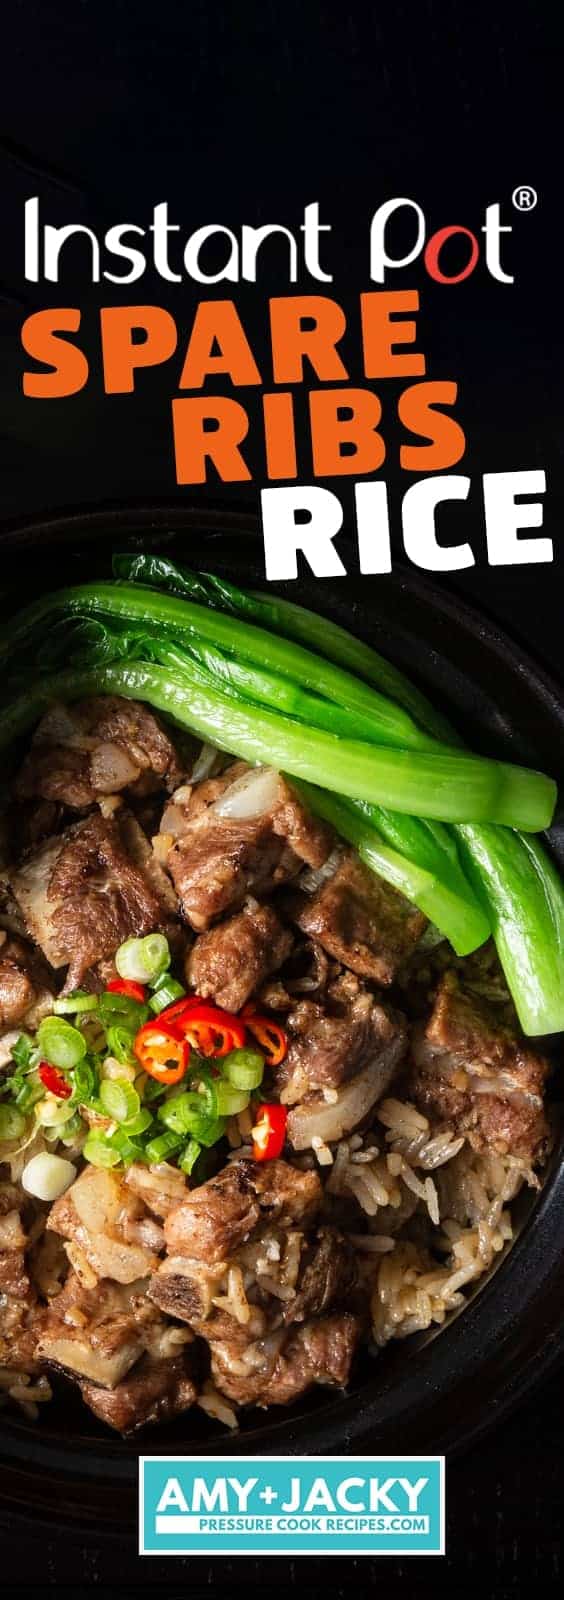 Instant Pot Spare Ribs and Rice (Pressure Cooker) 豉汁排骨飯. Super Easy and Quick One Pot Meal. Deliciously tender black bean sauce spare ribs with flavorful comforting rice. #instantpot #pressurecooker #ribs #chinese #recipes #onepotmeal